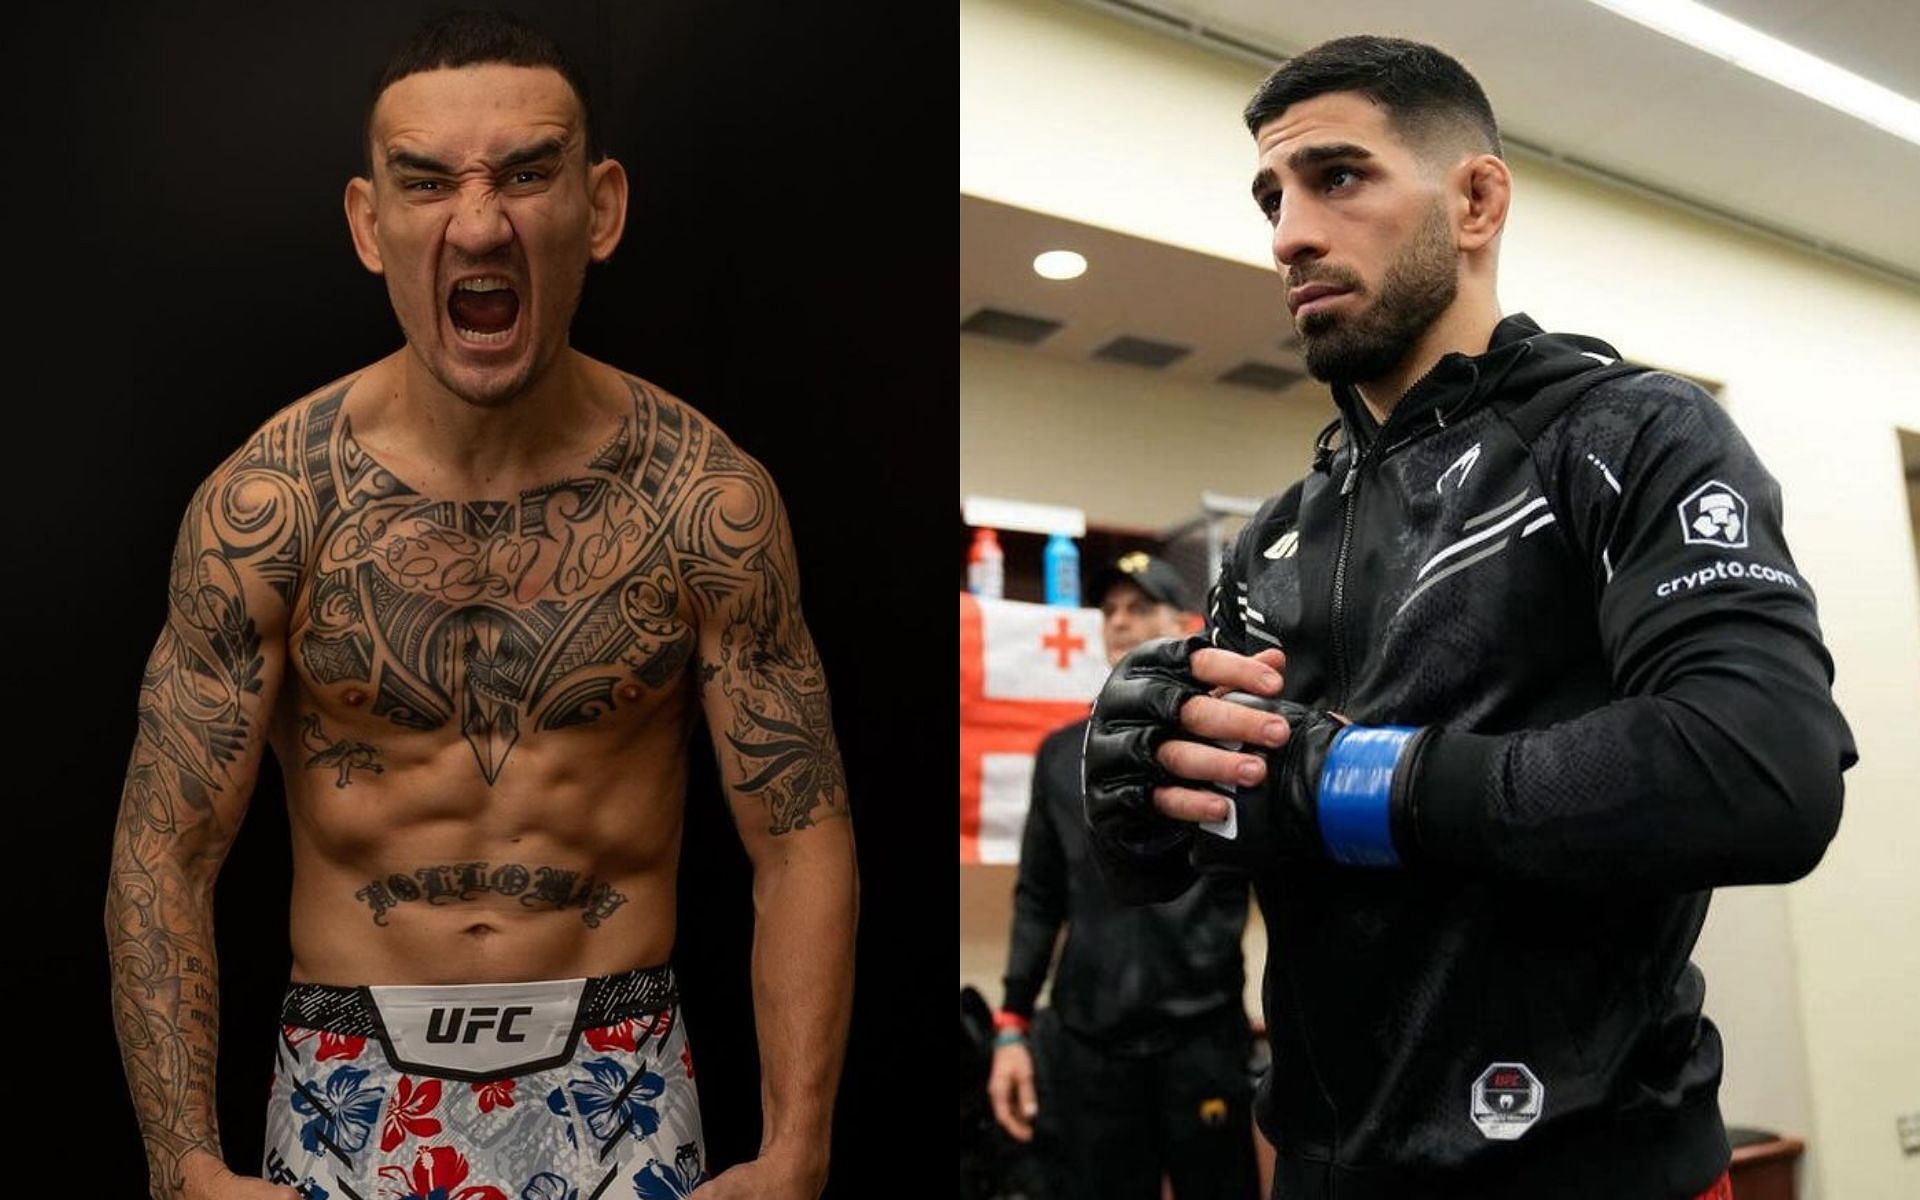 A unique Max Holloway (left) record still intact following UFC 300, believes Ilia Topuria (right) [Image courtesy @blessedmma and @iliatopuria on Instagram] 